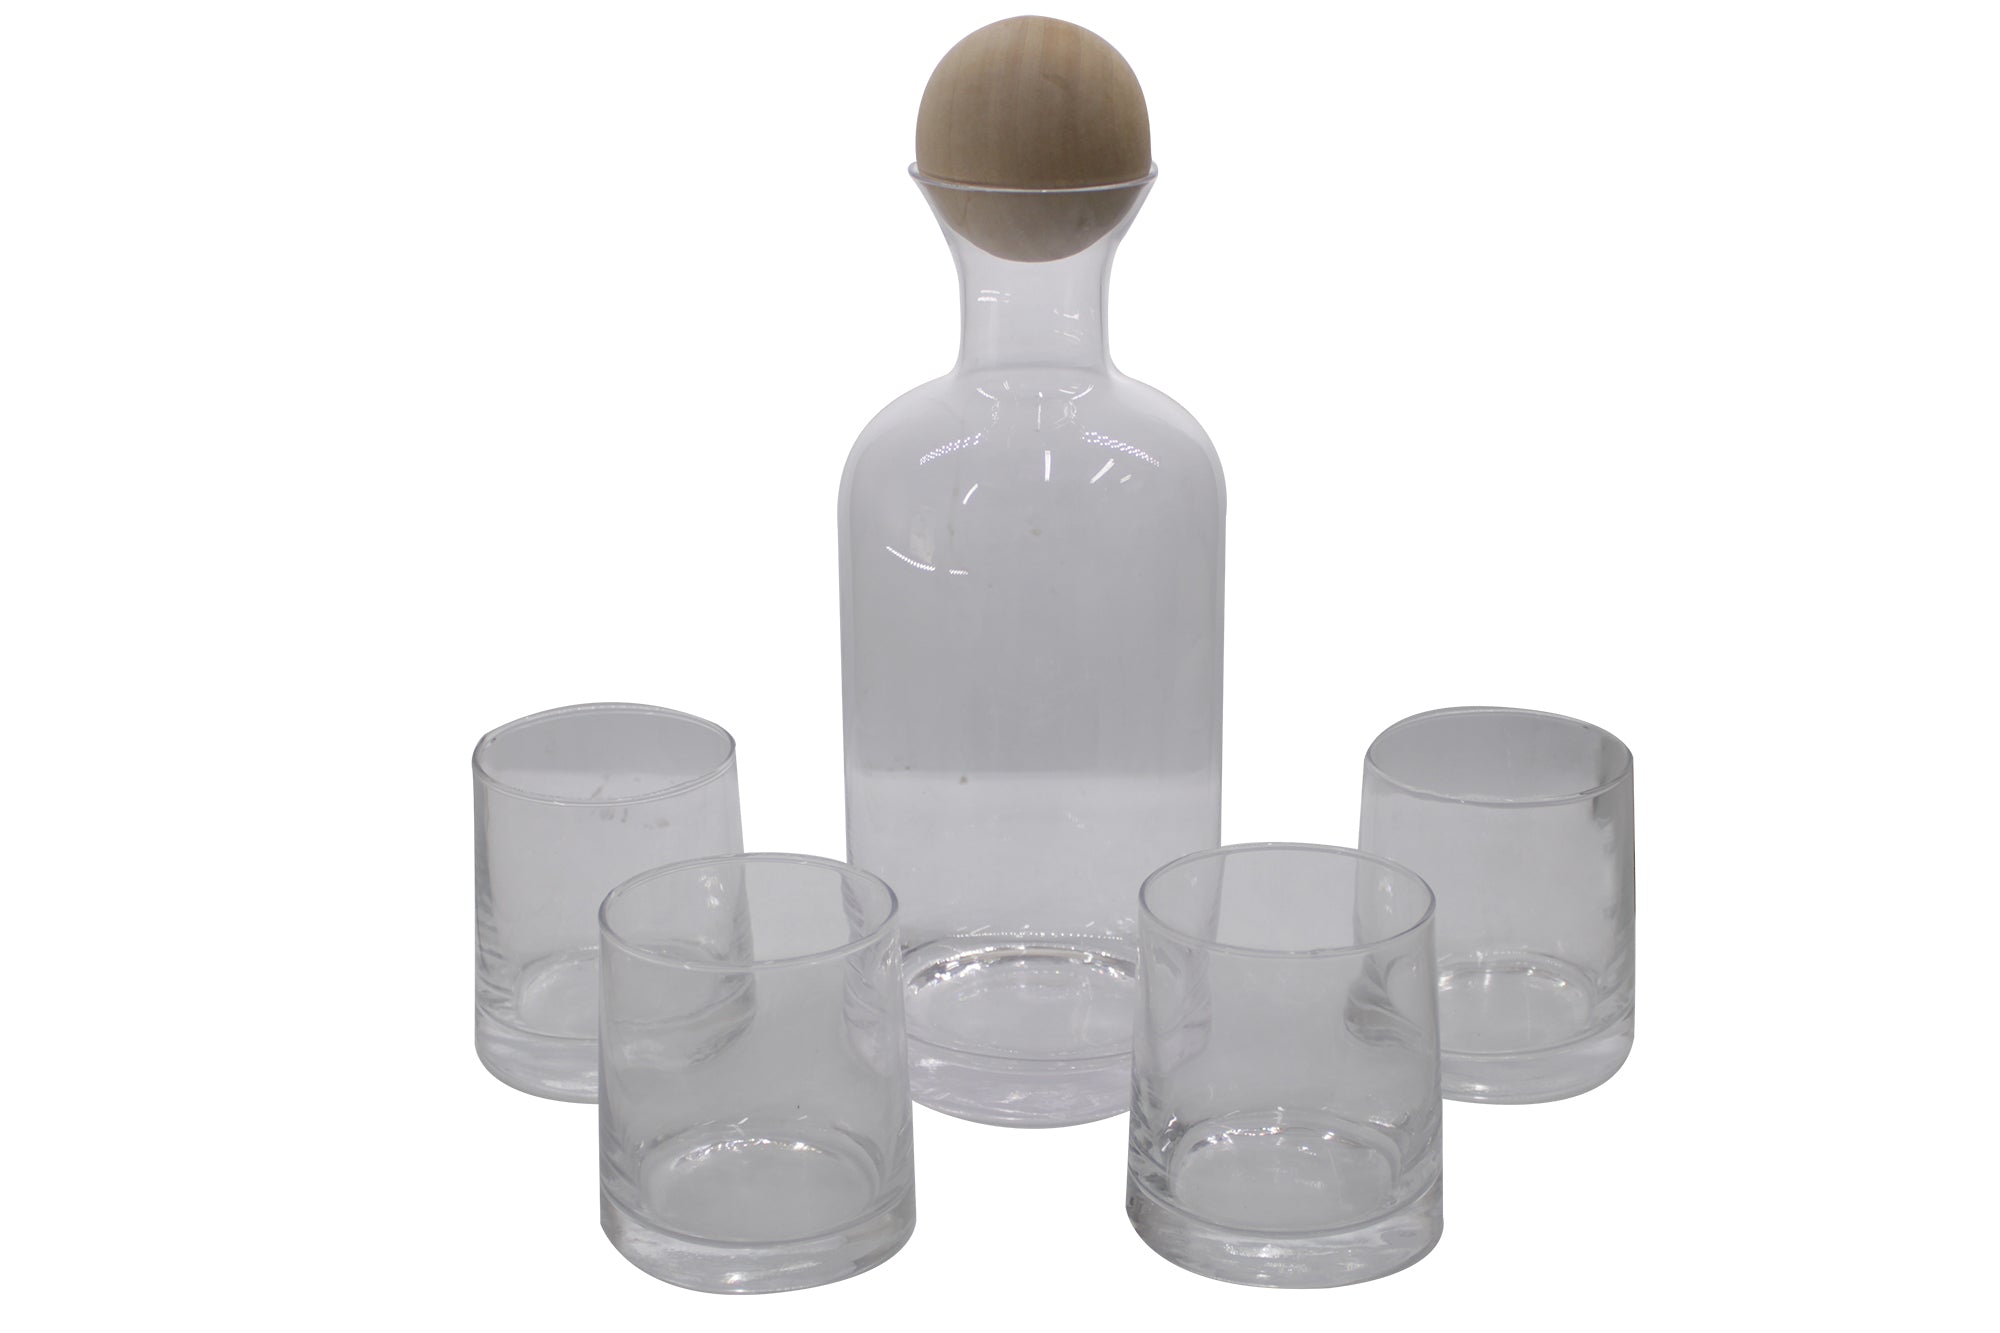 5 Piece METALLIC Clear Glass Drinking Tumblers & Carafe Set with oak Stopper